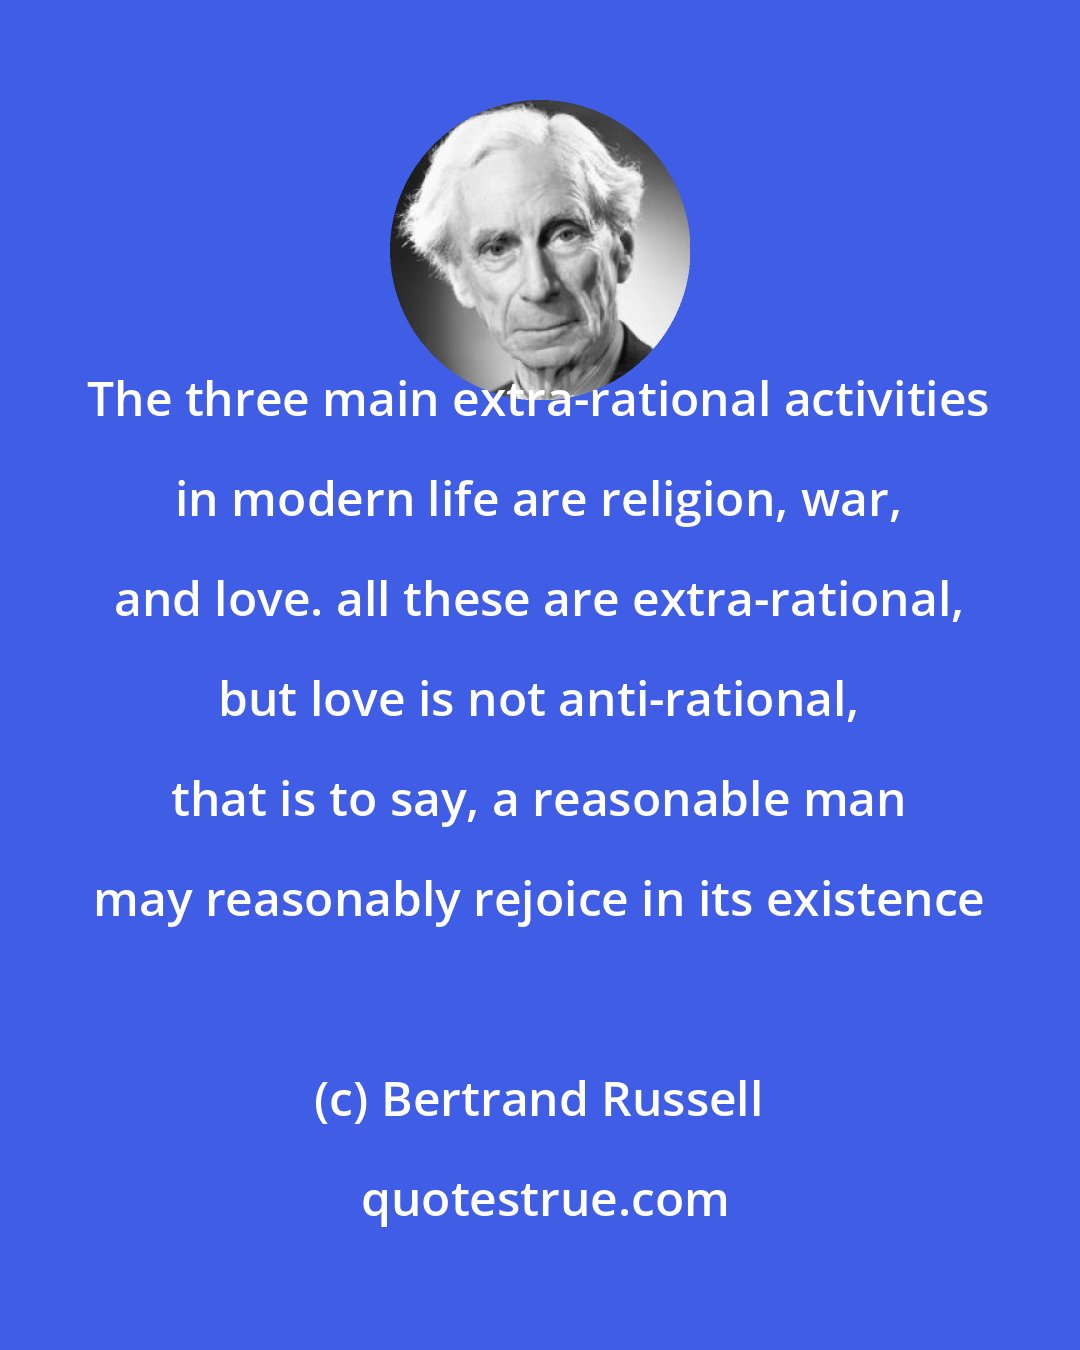 Bertrand Russell: The three main extra-rational activities in modern life are religion, war, and love. all these are extra-rational, but love is not anti-rational, that is to say, a reasonable man may reasonably rejoice in its existence